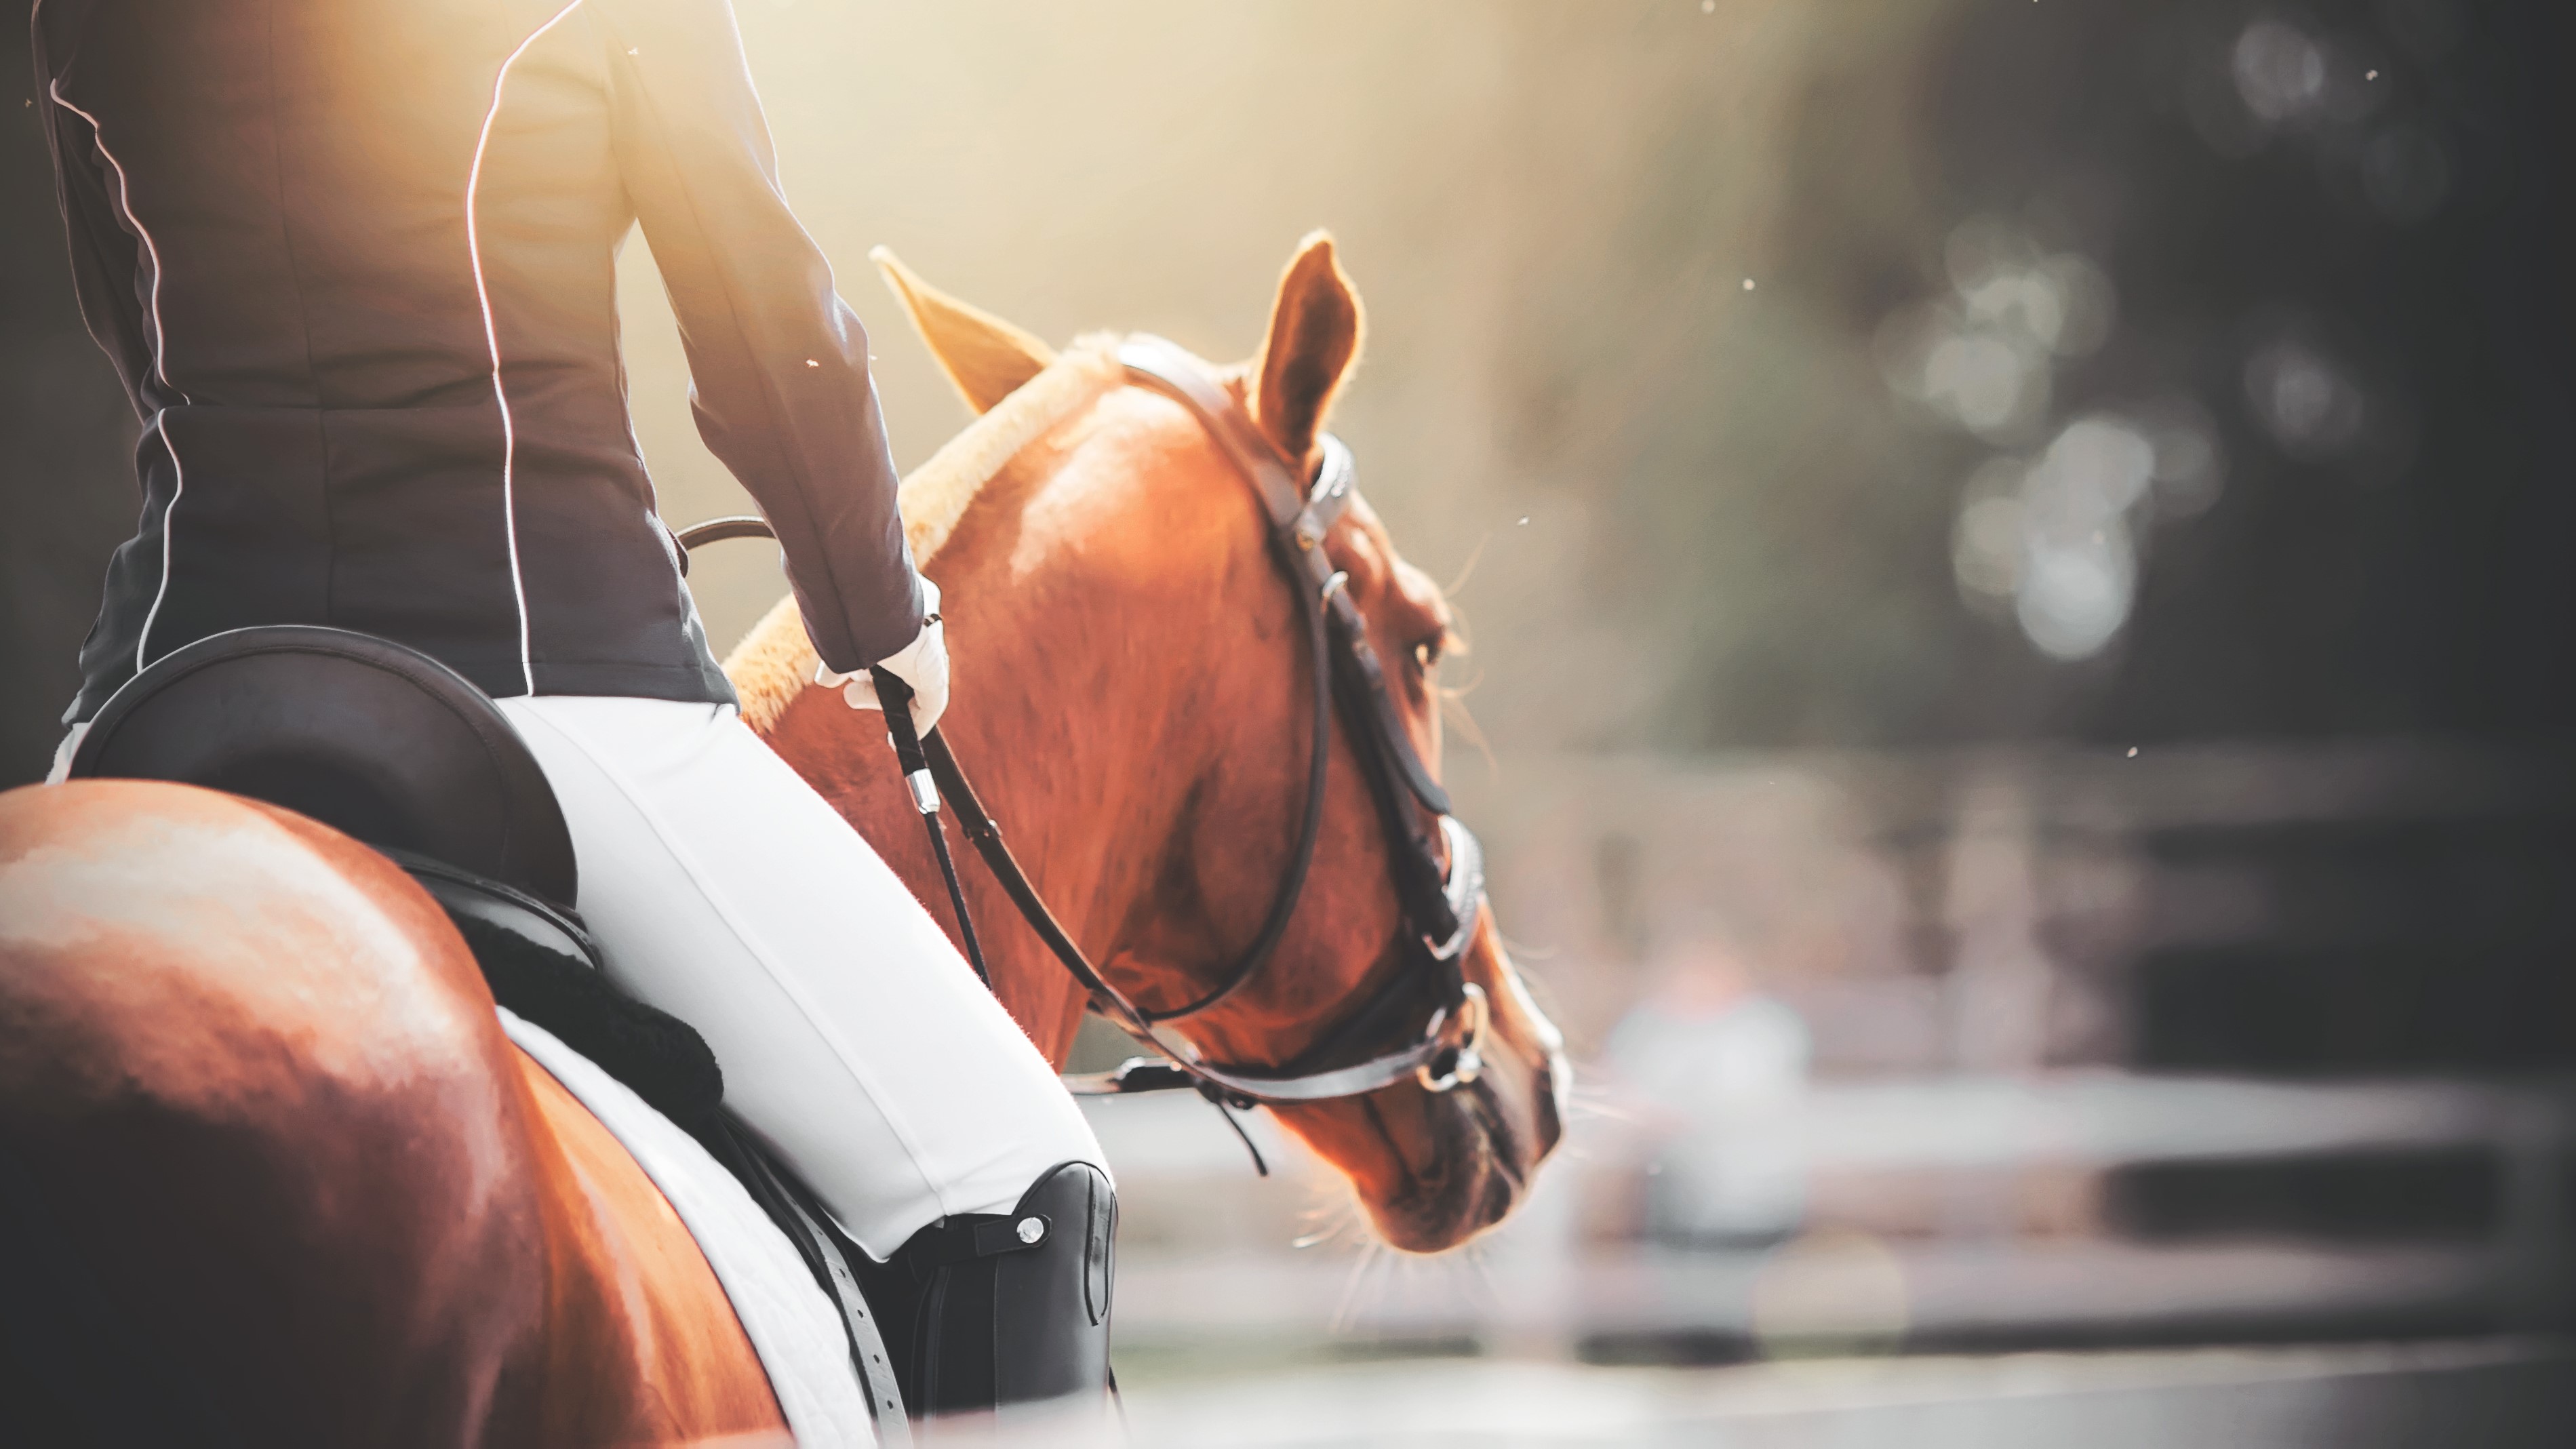 Learn the habits and attitude of what makes a good horse rider.